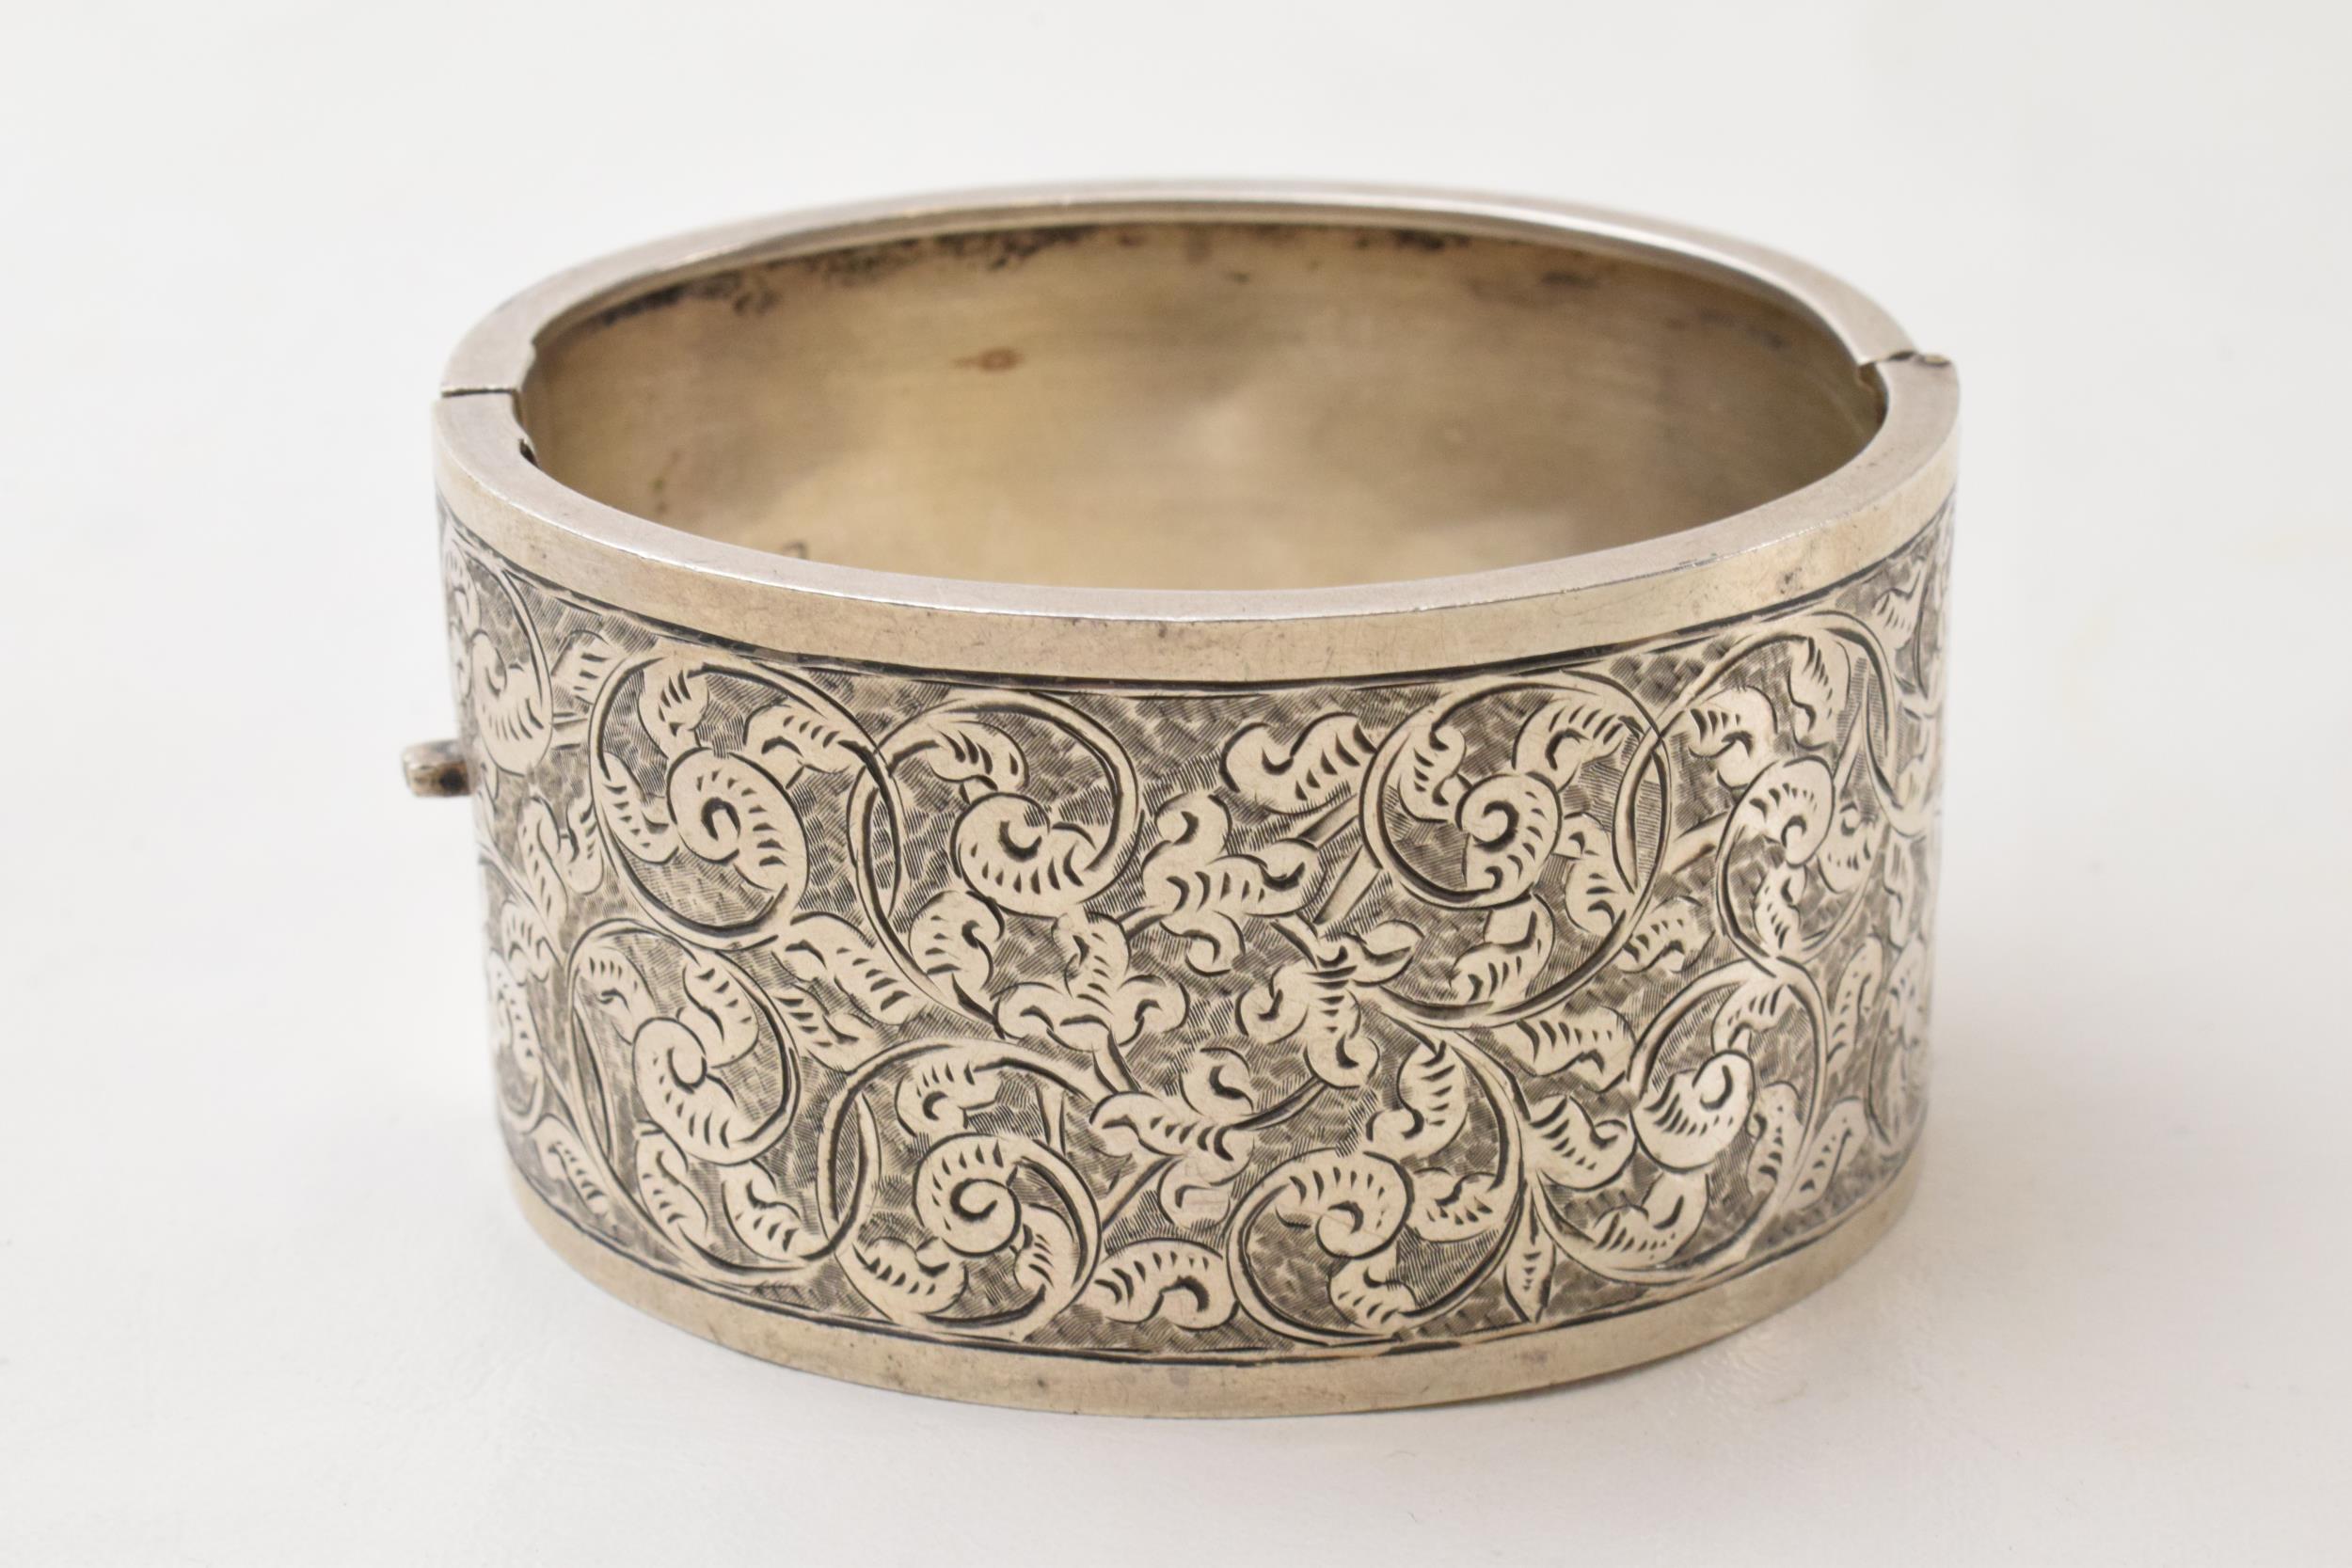 Silver wide engraved bangle with floral decoration, Birmingham 1915, 33.8 grams.